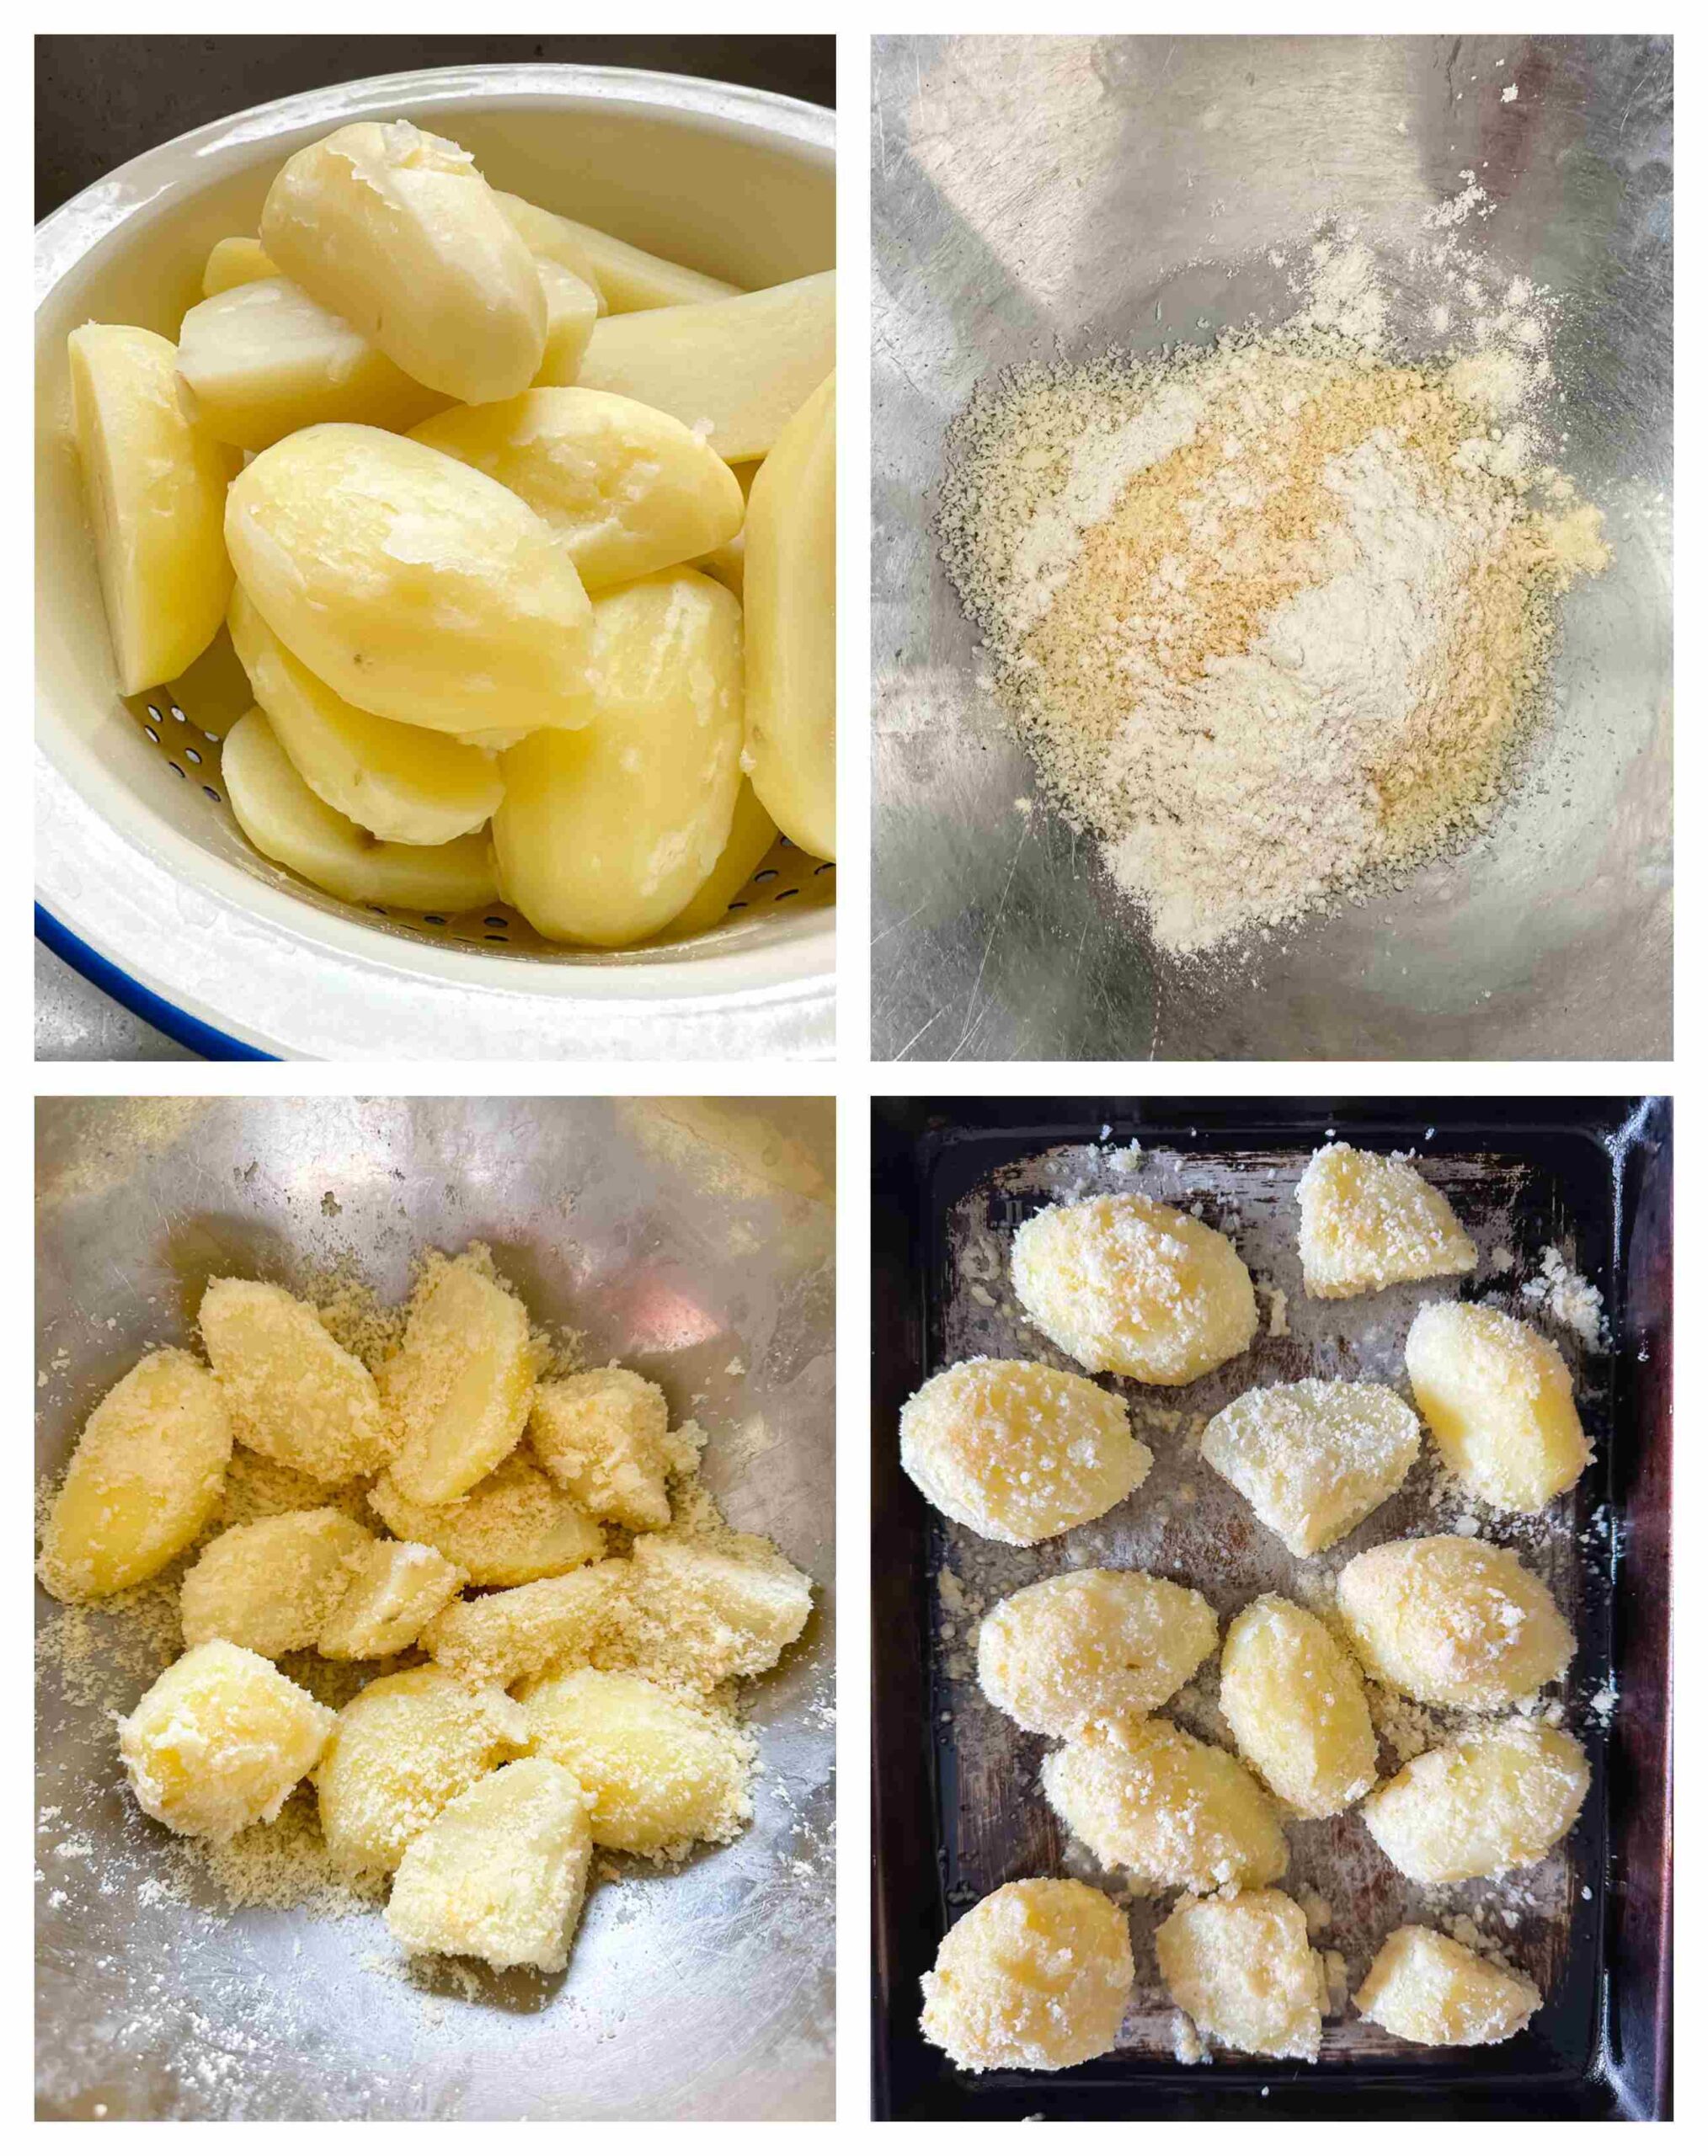 Process shot of potatoes being prepared with garlic and Parmesan